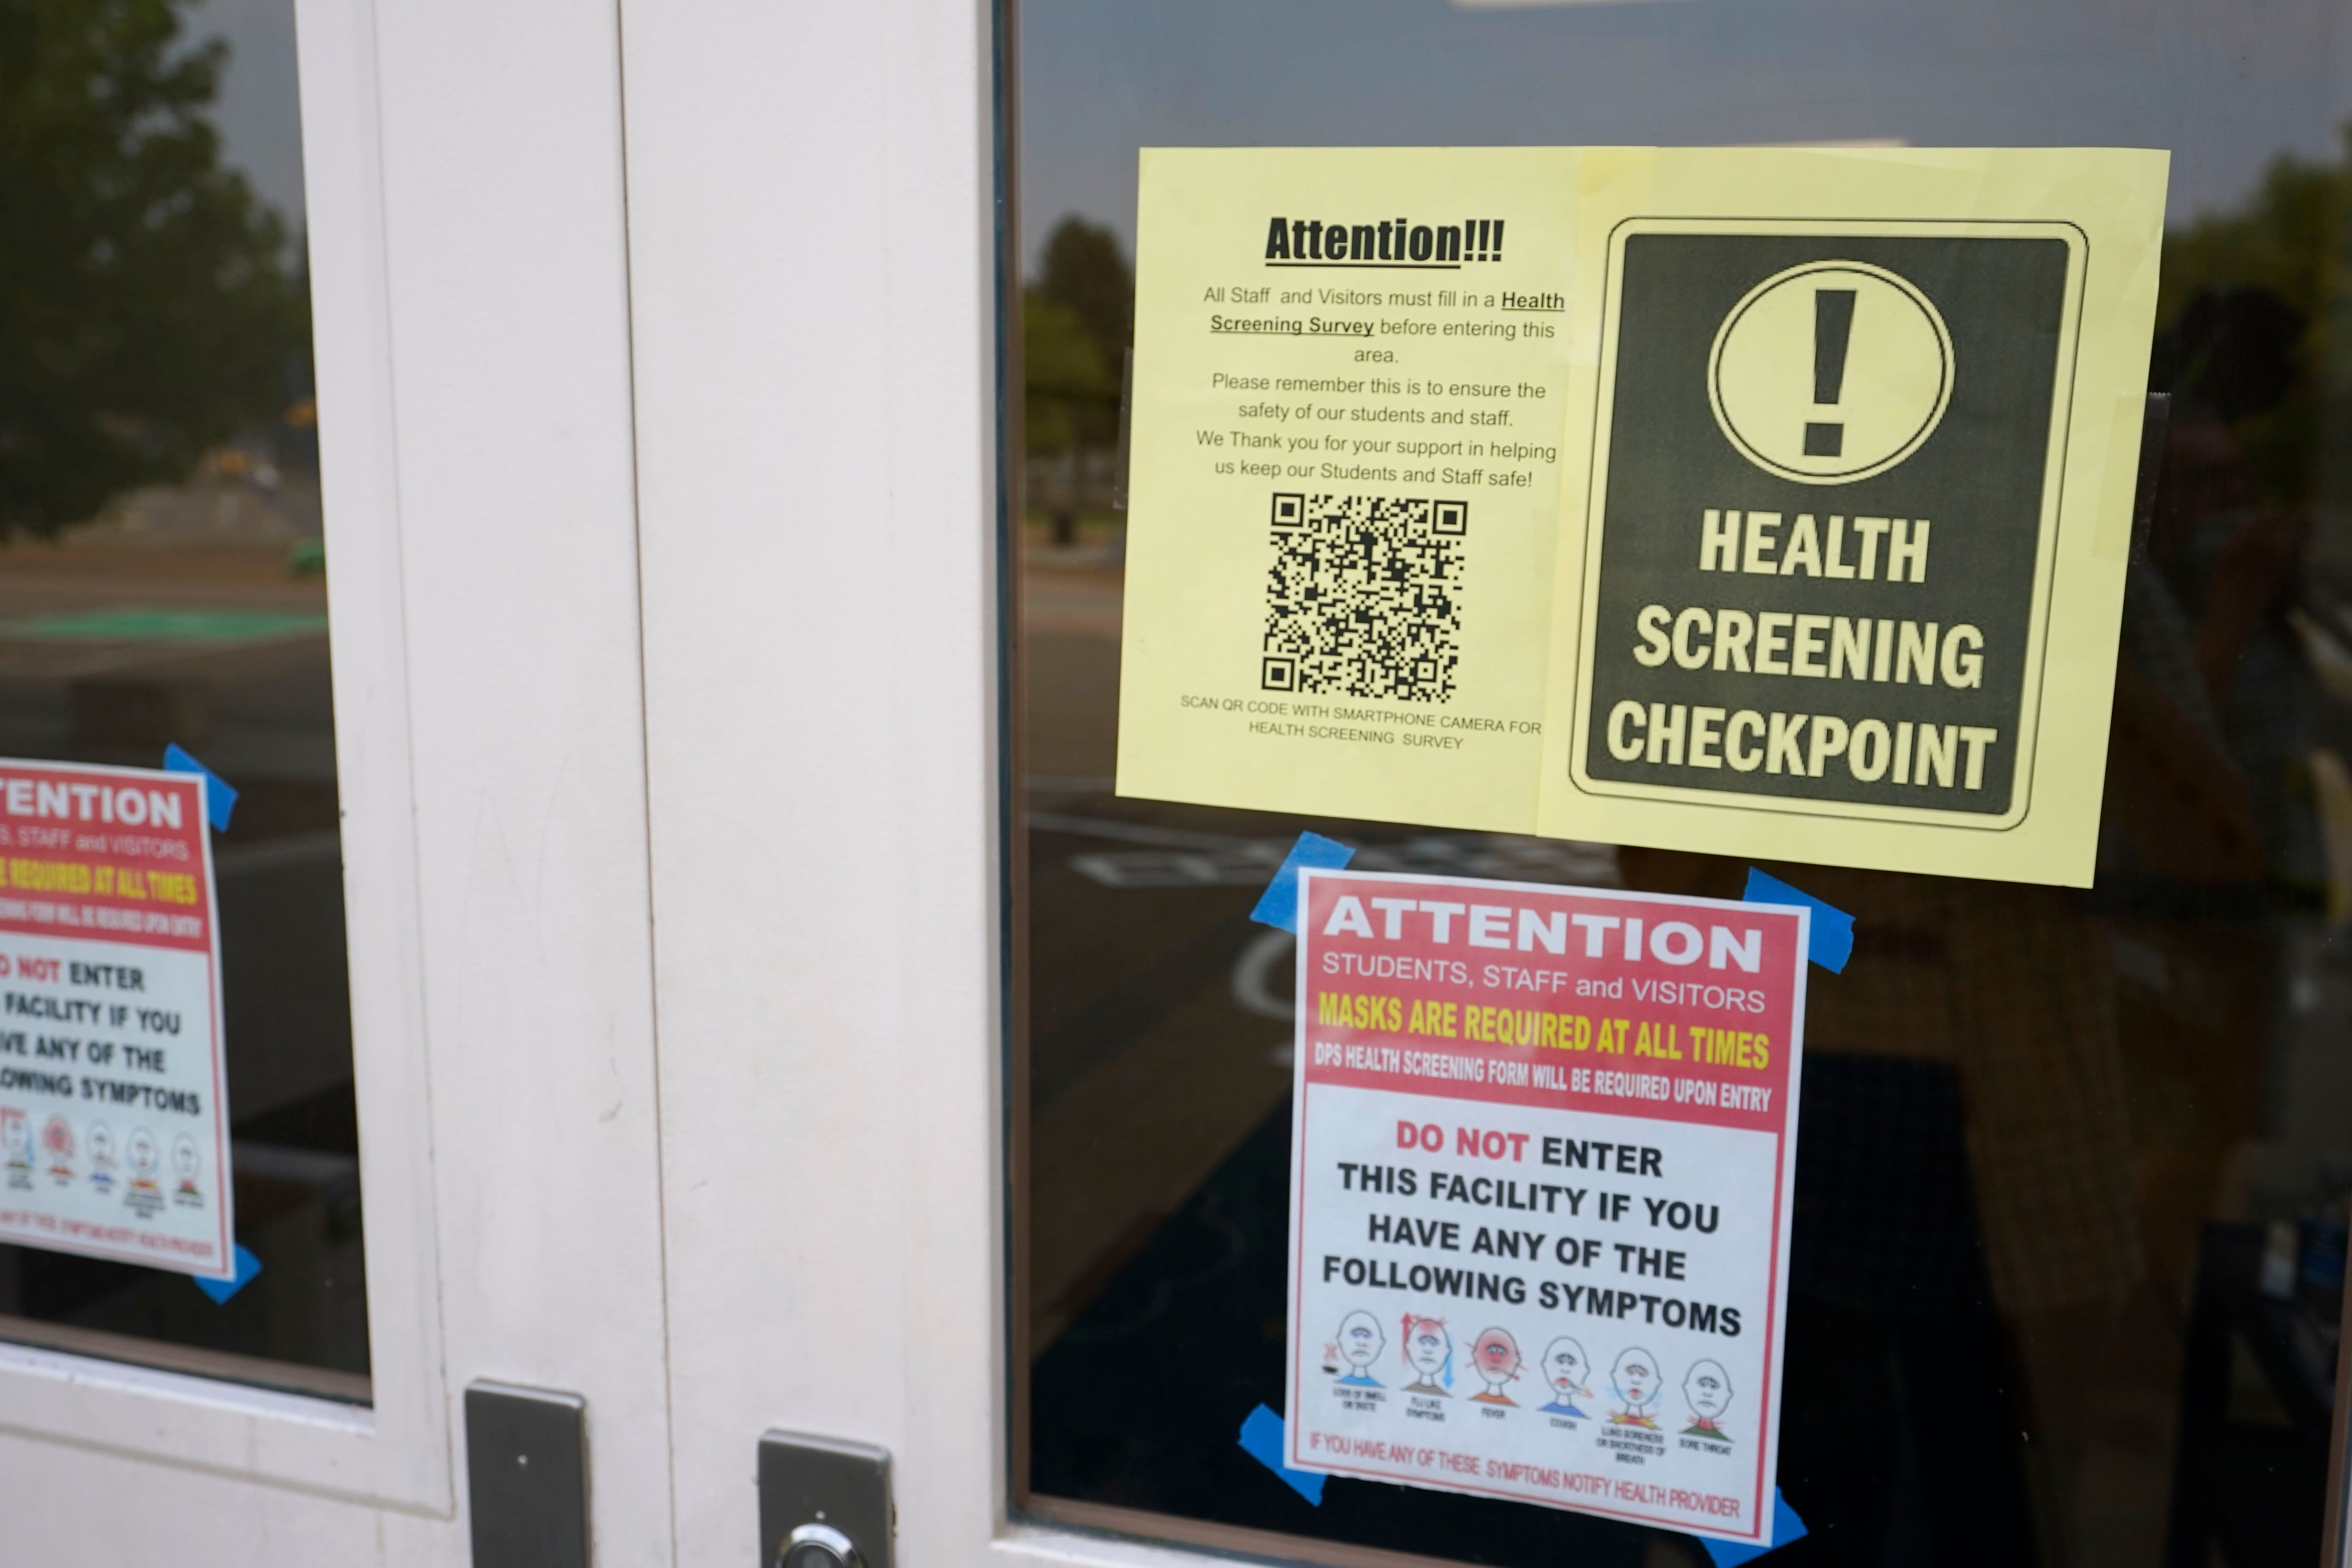 Sign for a health checkpoint hangs in the window of a schoolhouse door.